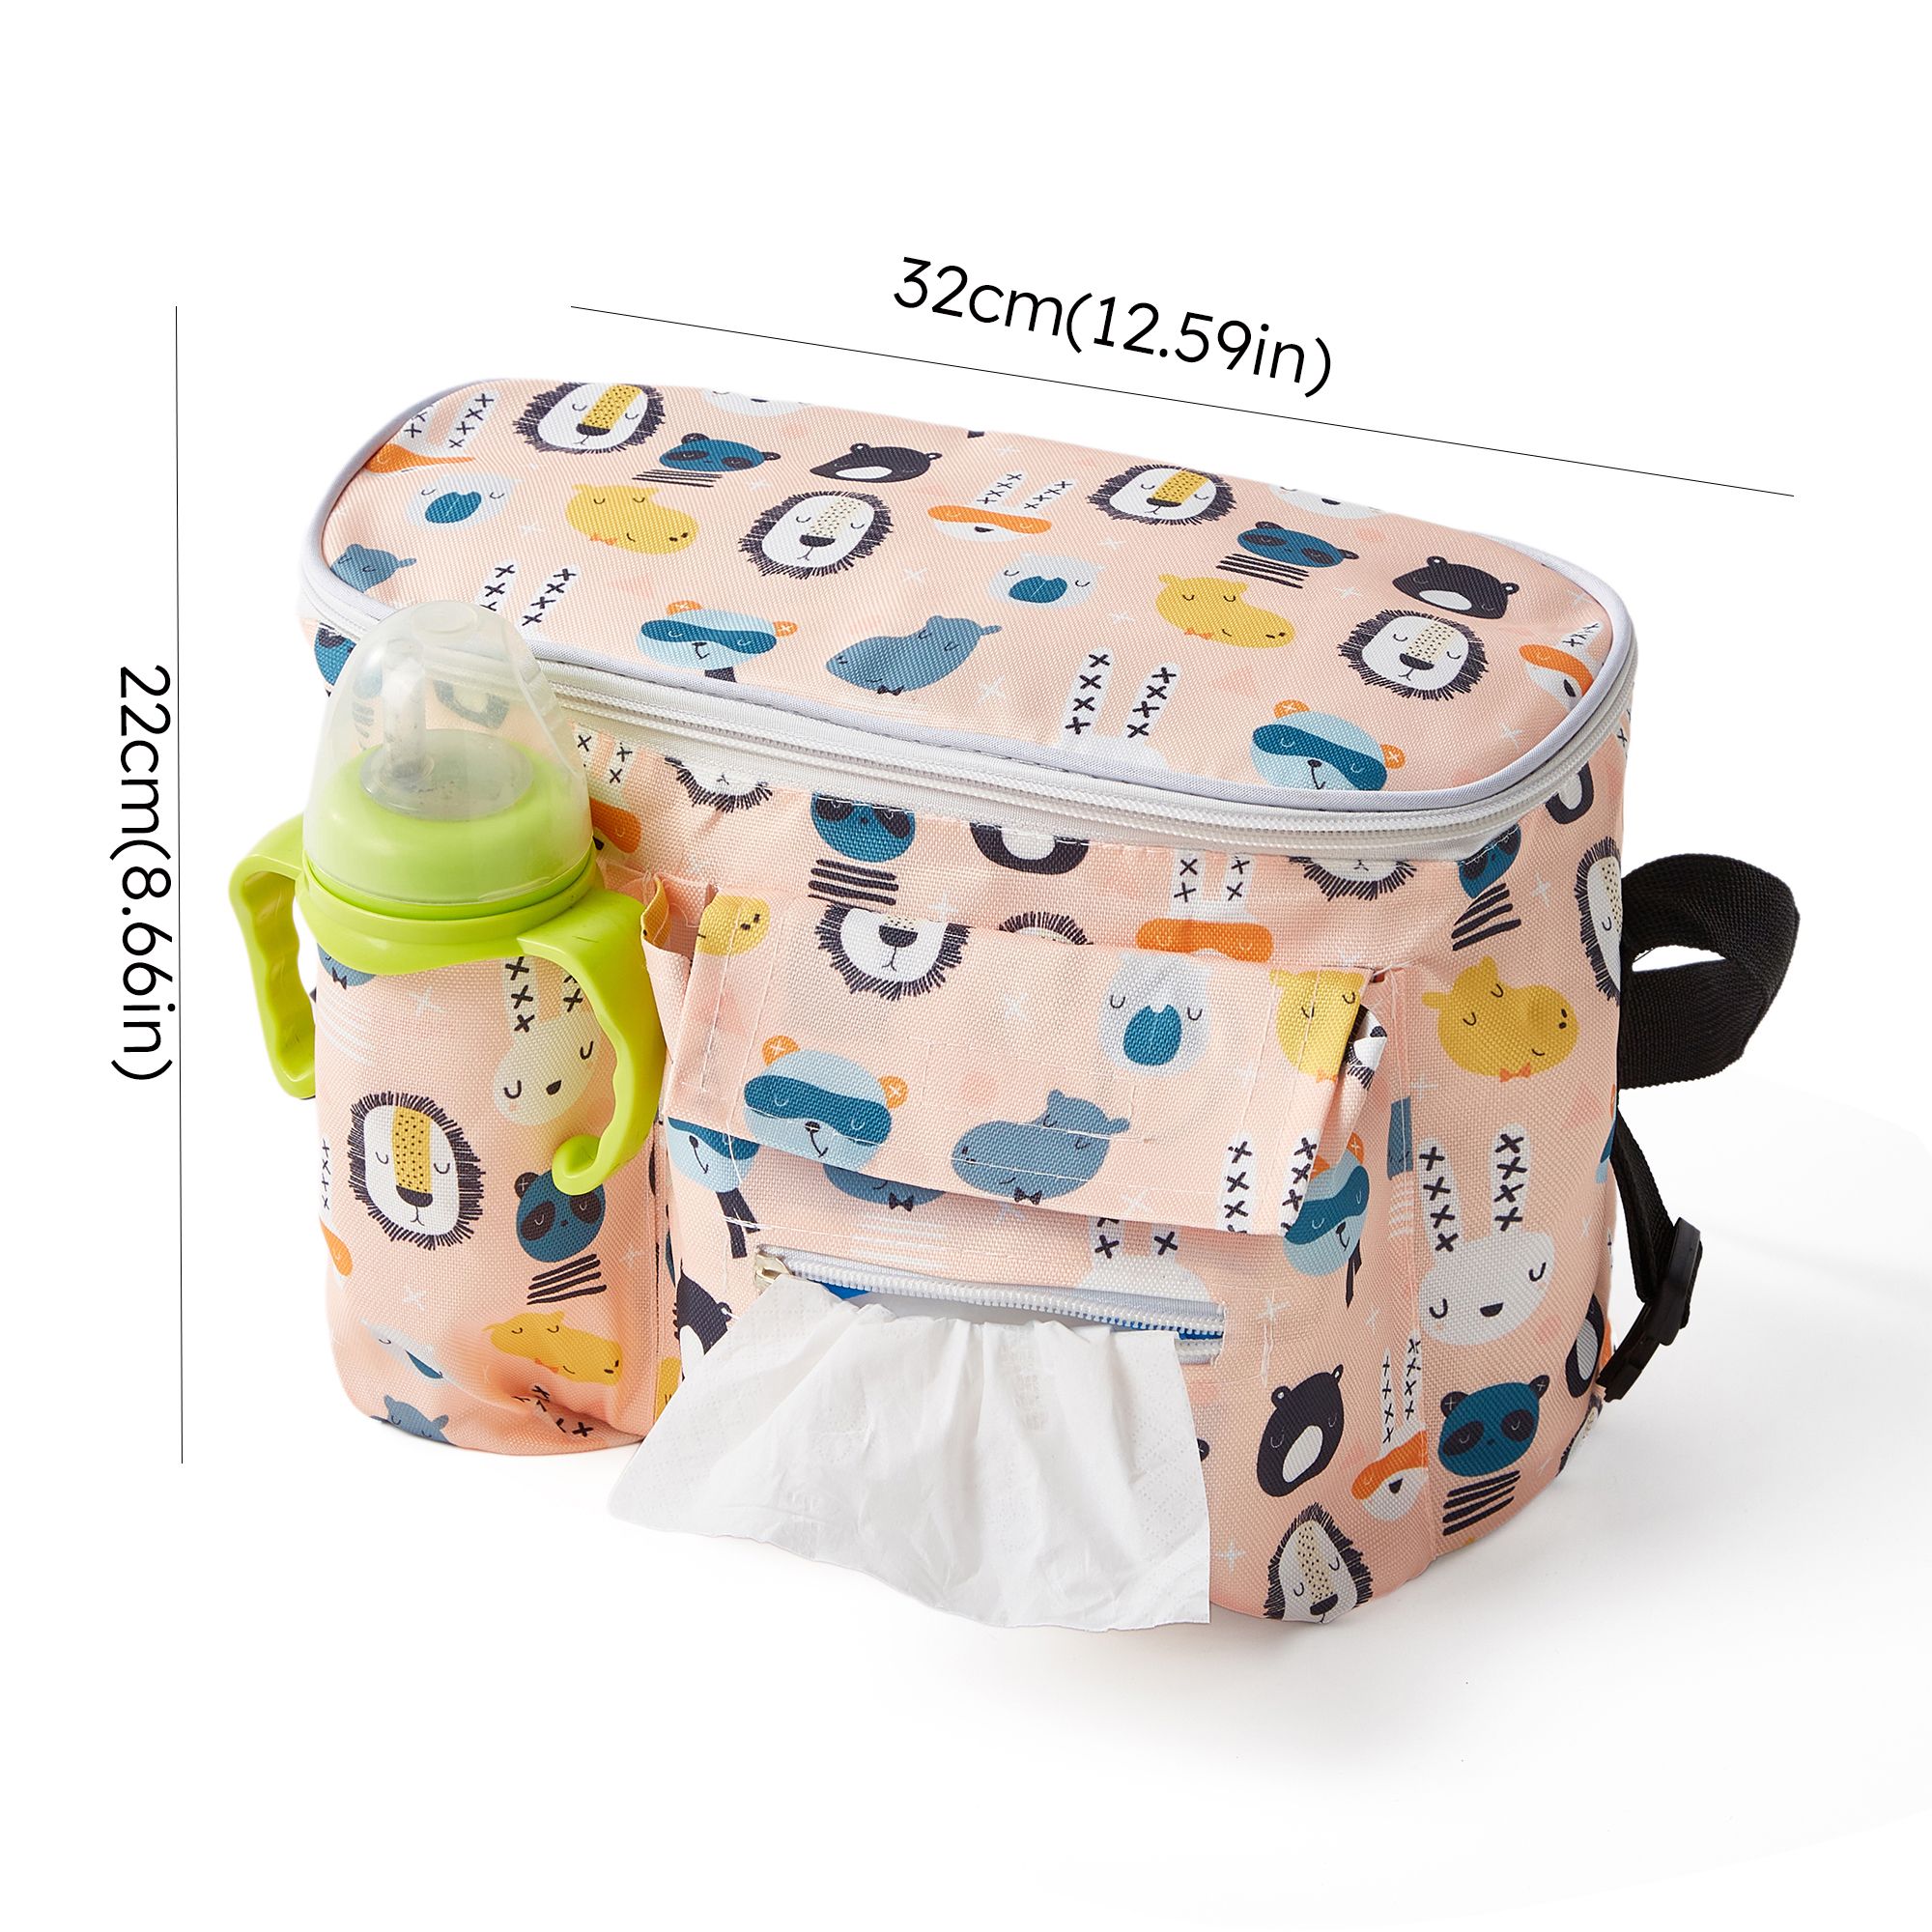 Baby Stroller Organizer Bag: Multifunctional Storage Solution for On-the-Go Moms